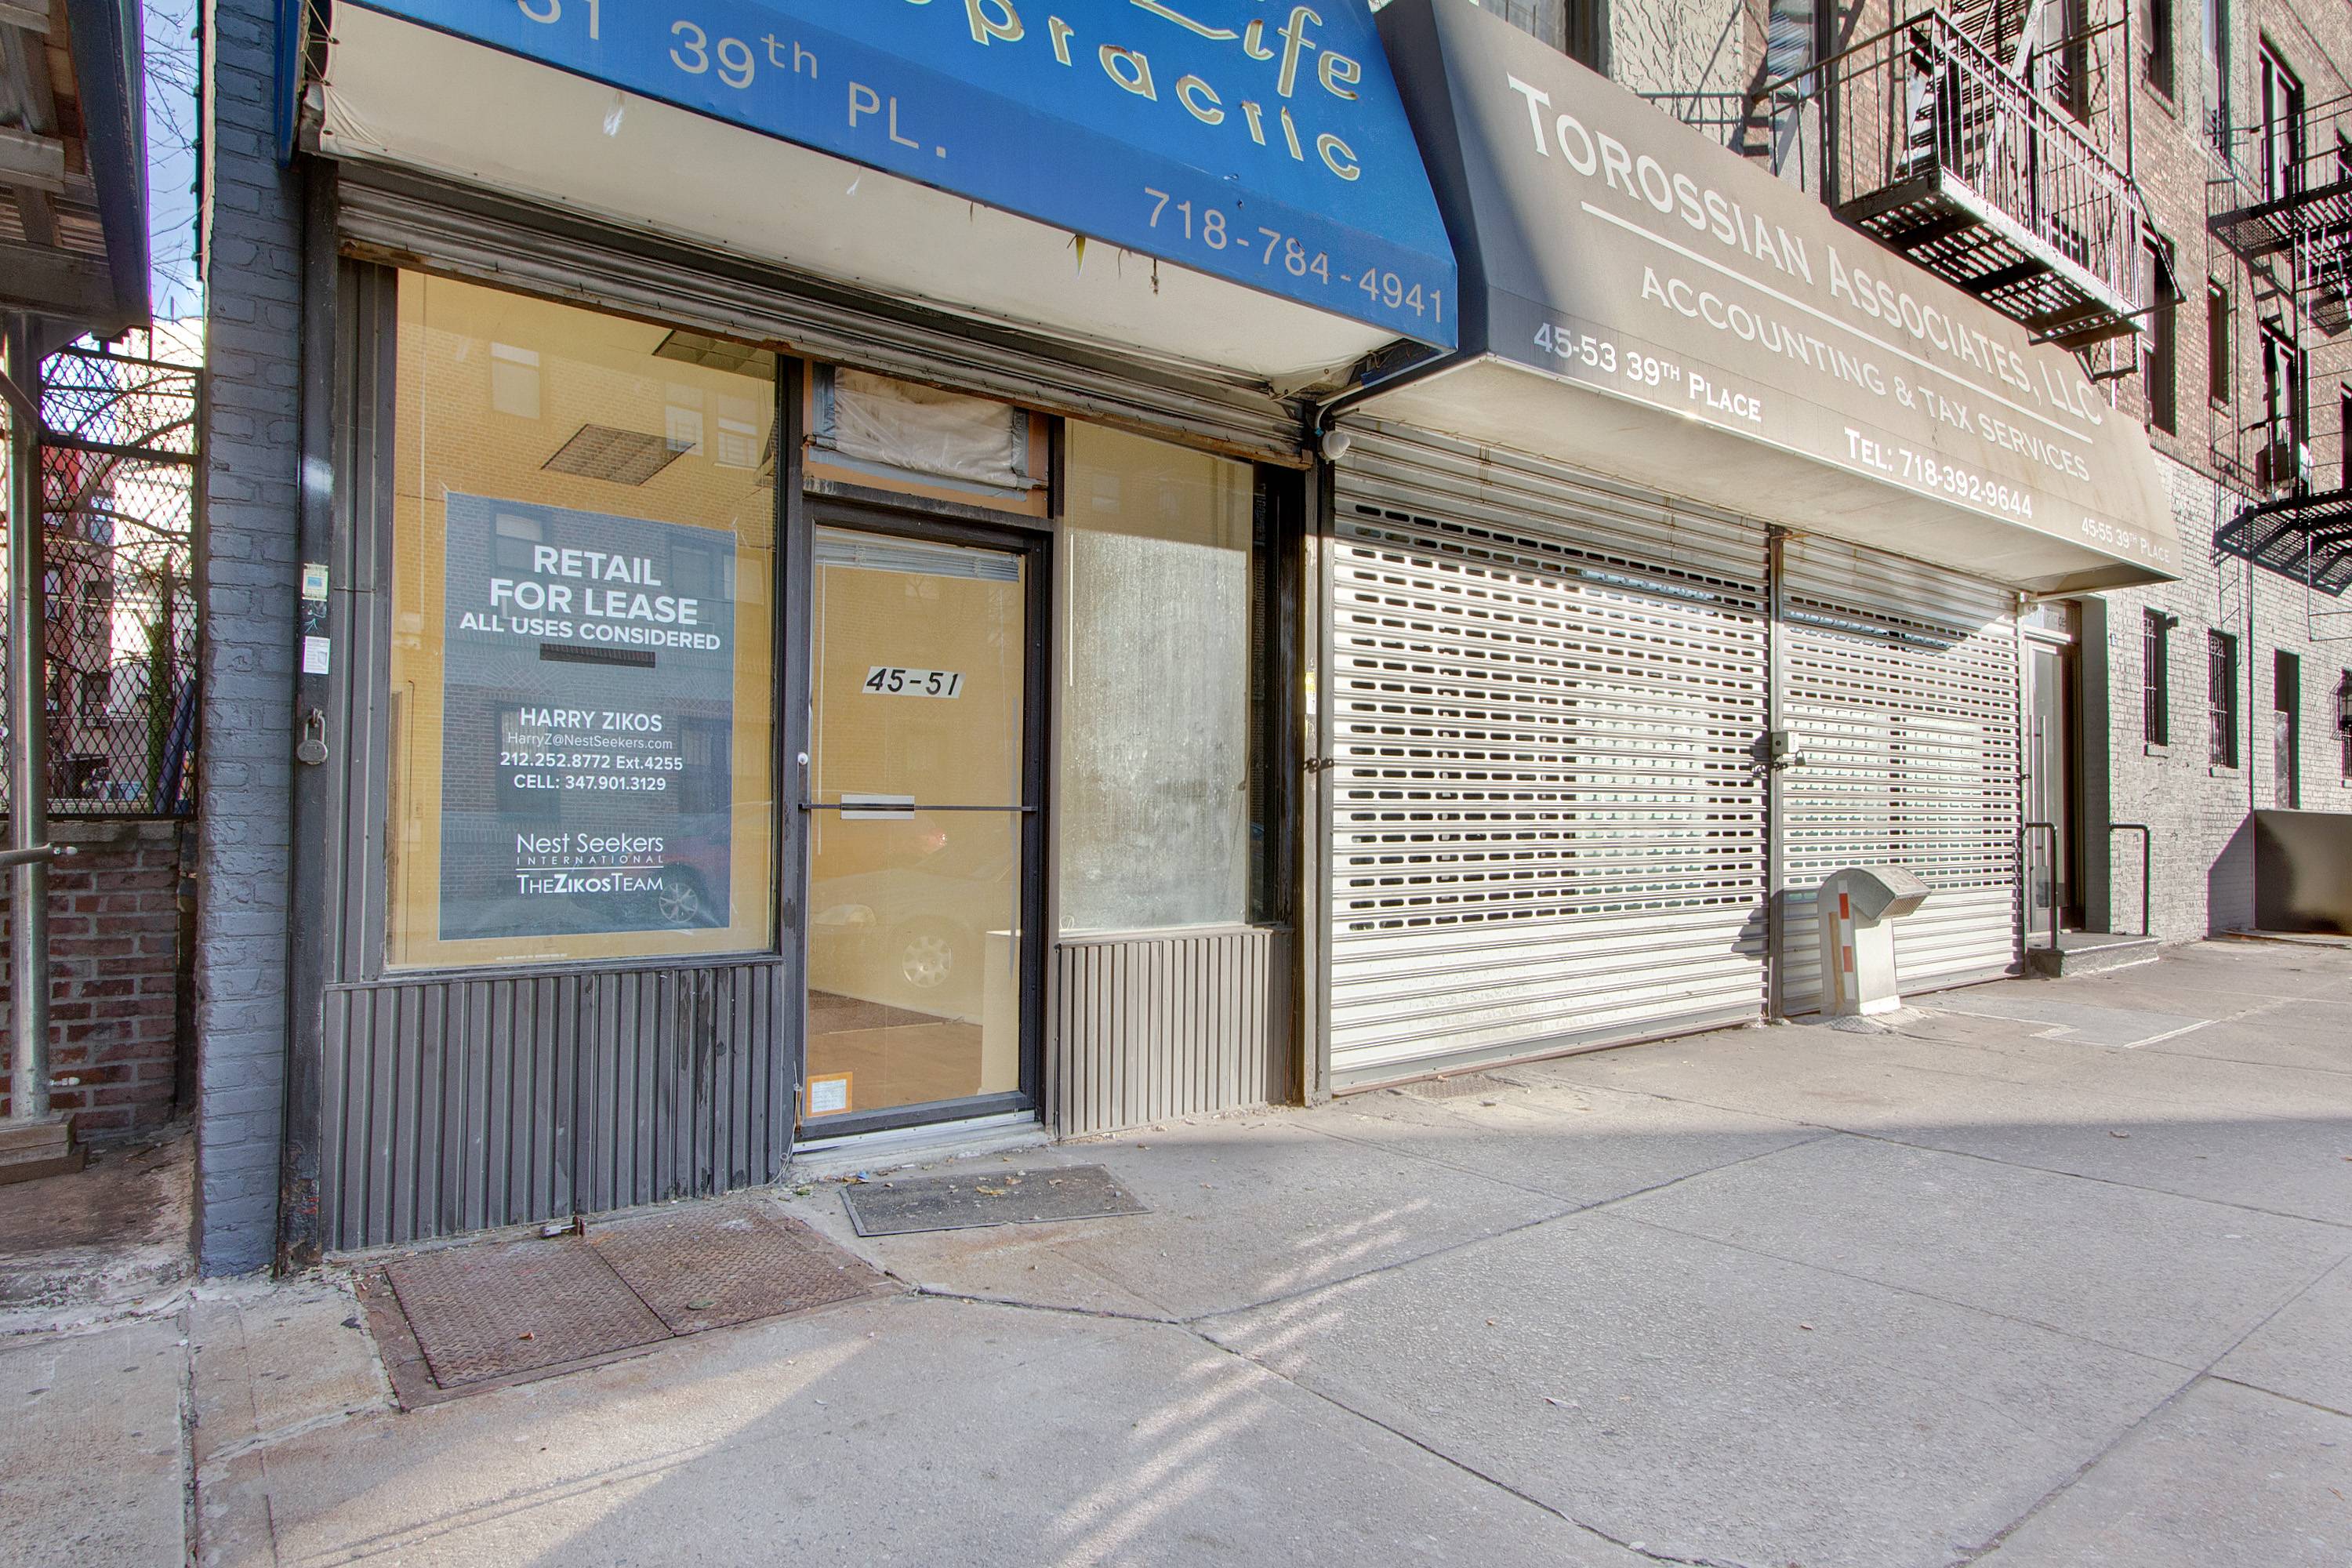 Sunnyside, Queens: Retail Space For Lease a Block away from 7 Train